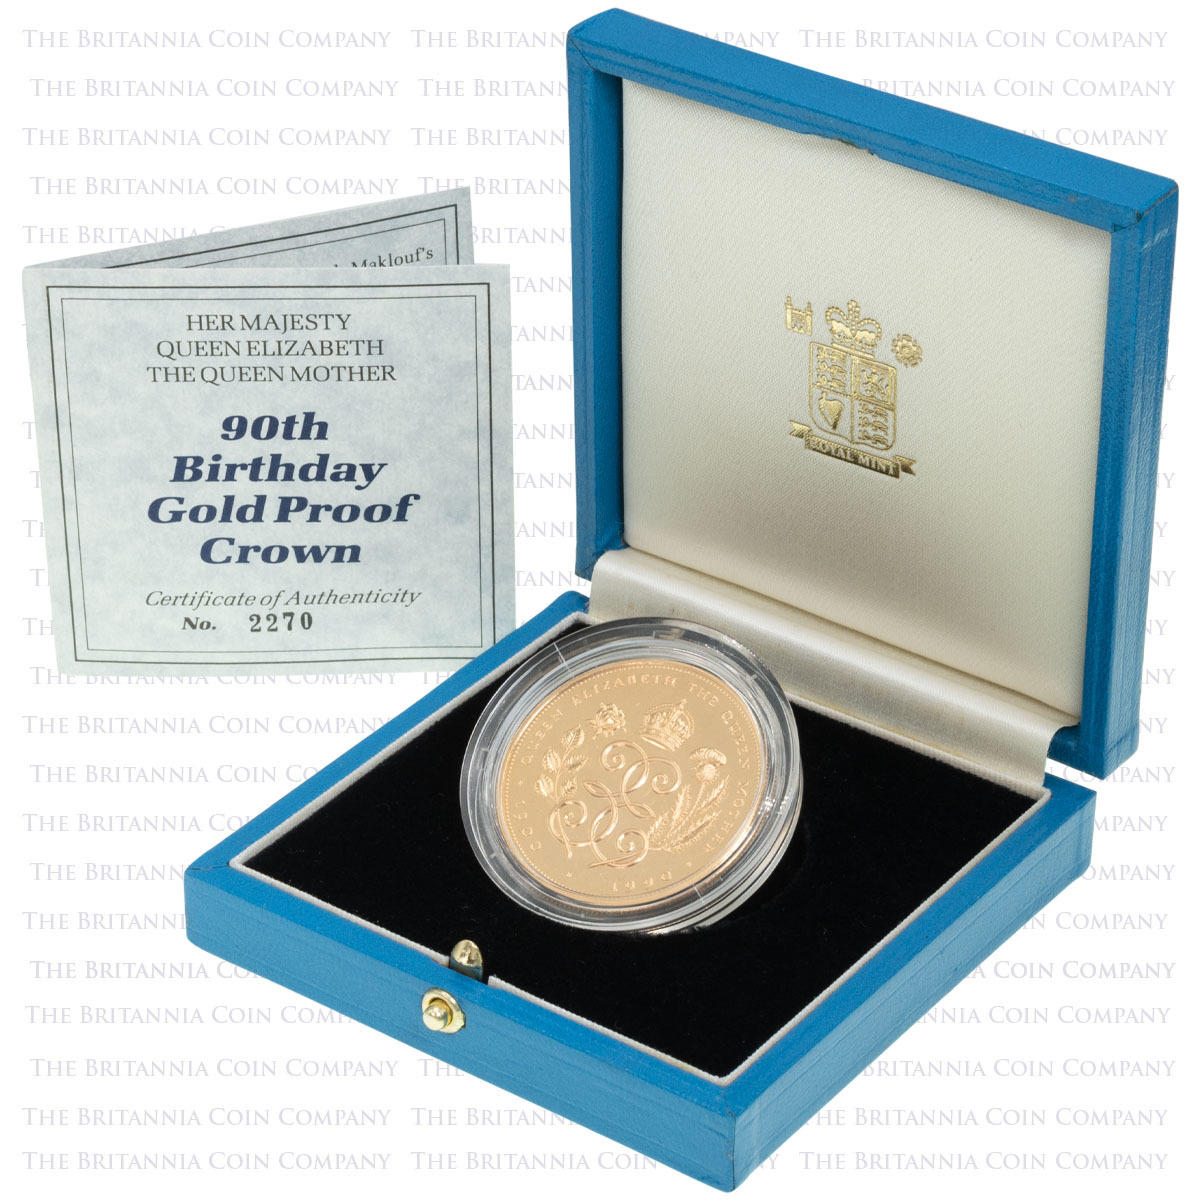 1990 Queen Mother 90th Birthday Five Pound Crown Gold Proof Coin In Box